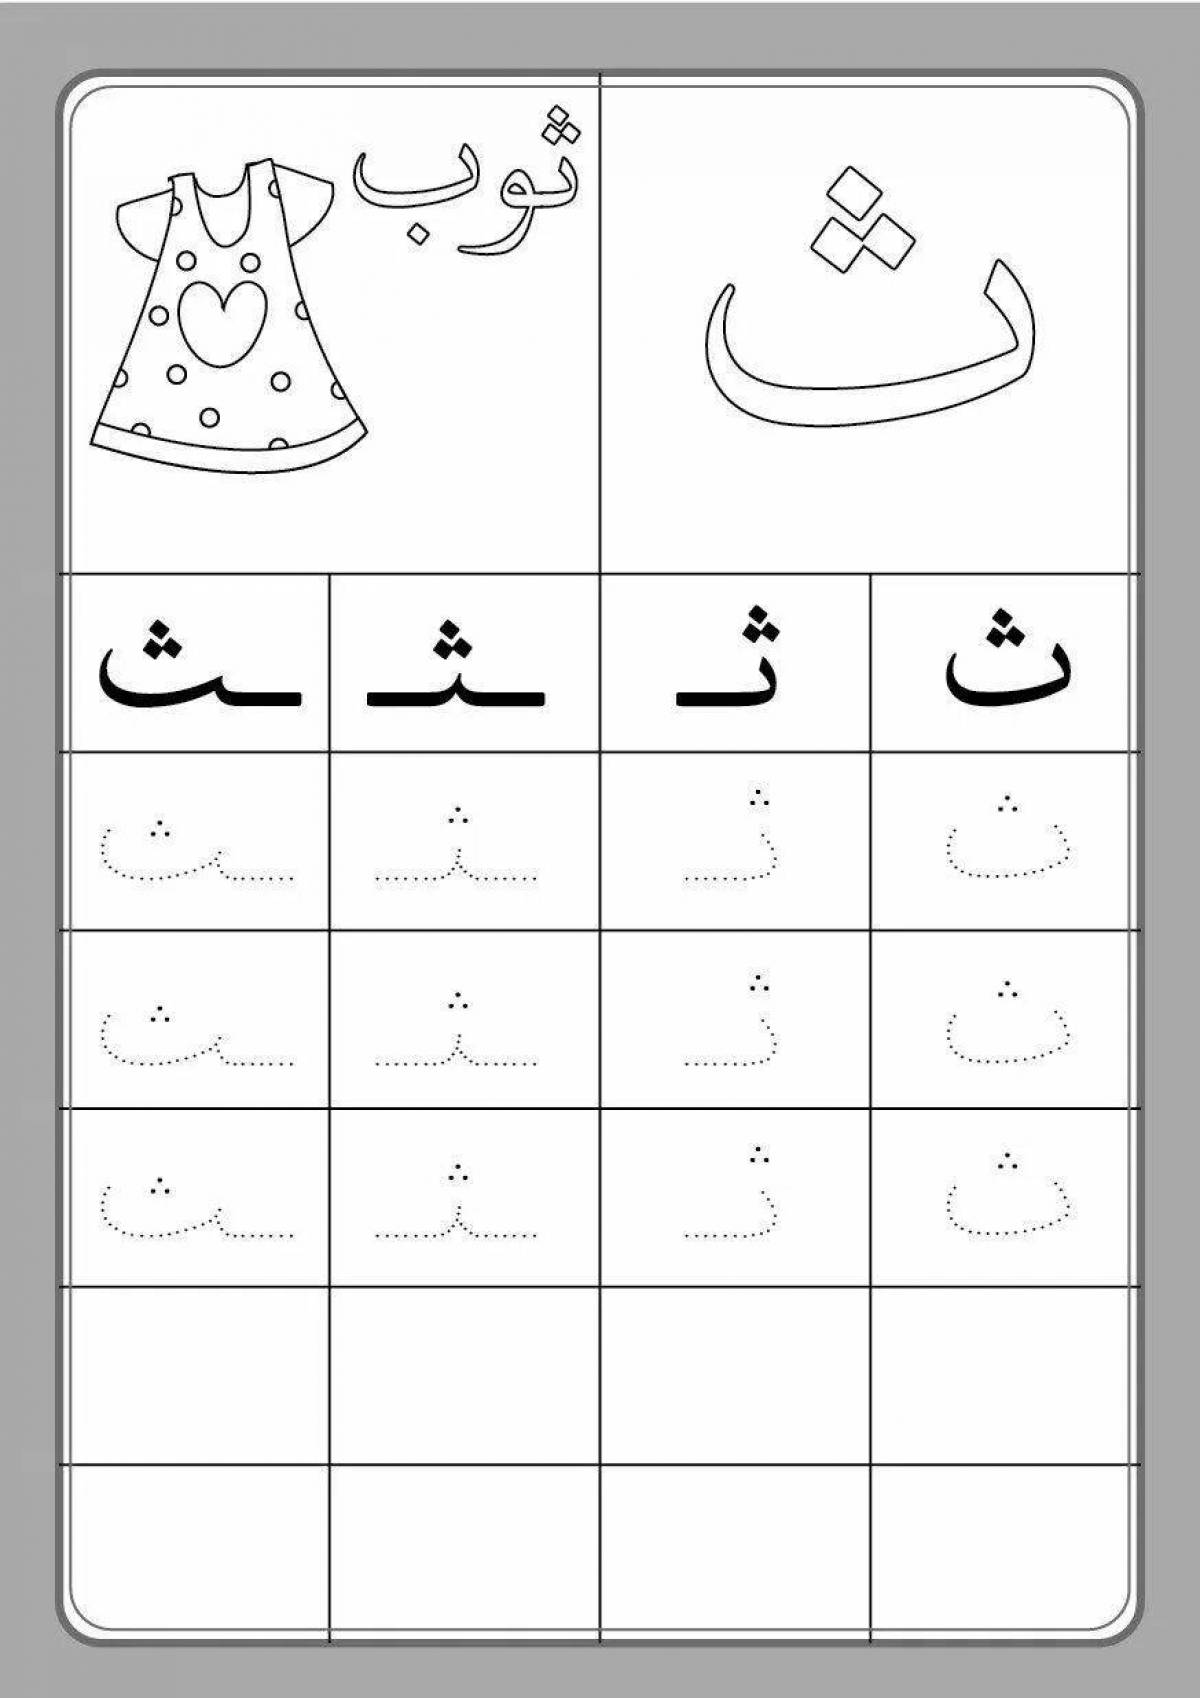 Coloring for children with colorful Arabic letters